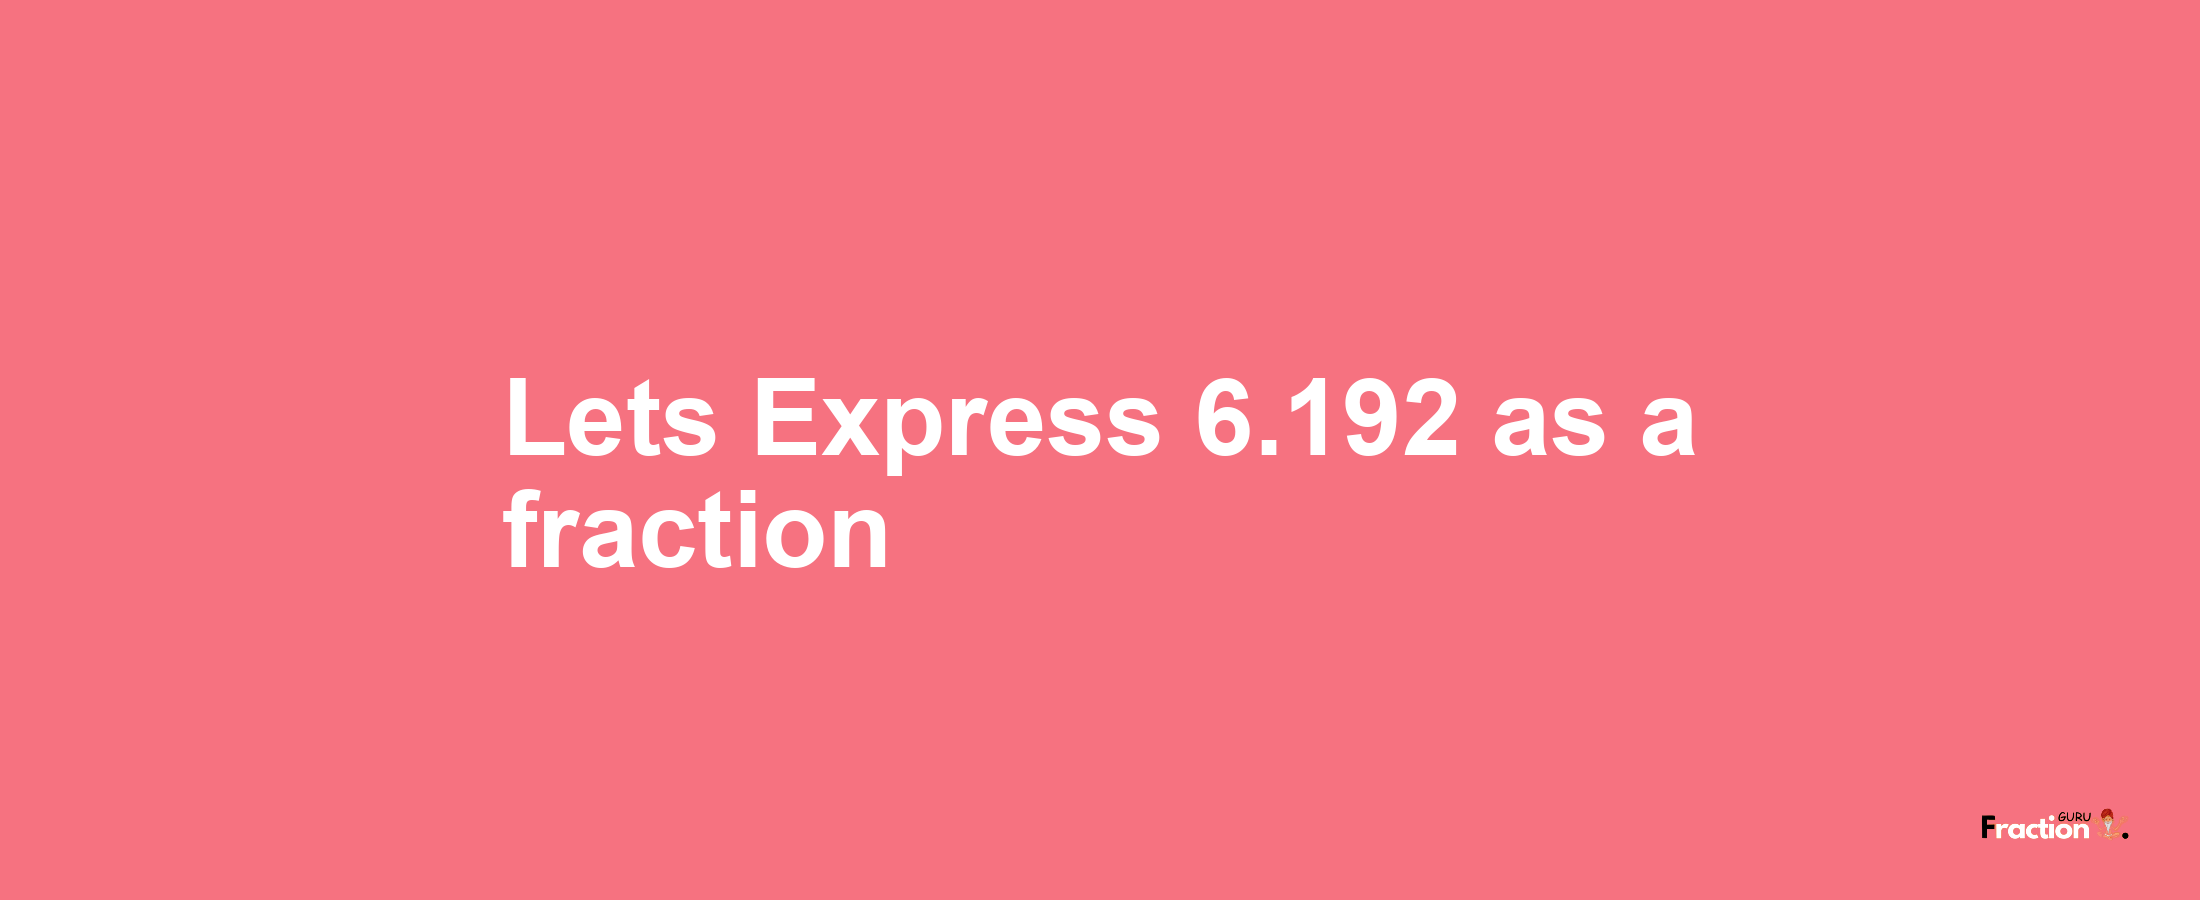 Lets Express 6.192 as afraction